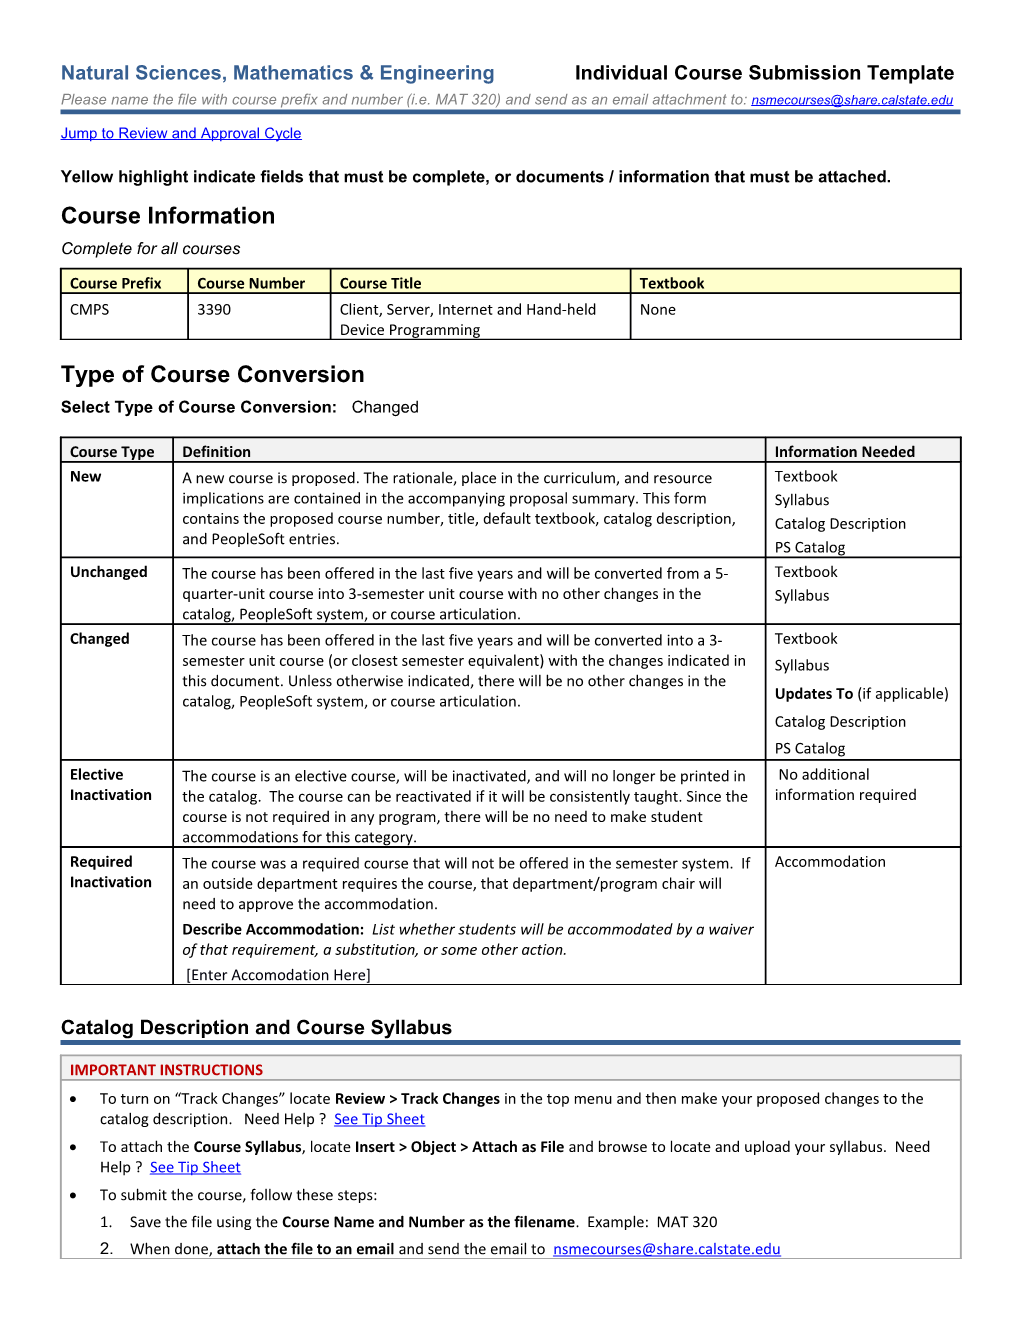 Natural Sciences, Mathematics & Engineering Individual Course Submission Template s3